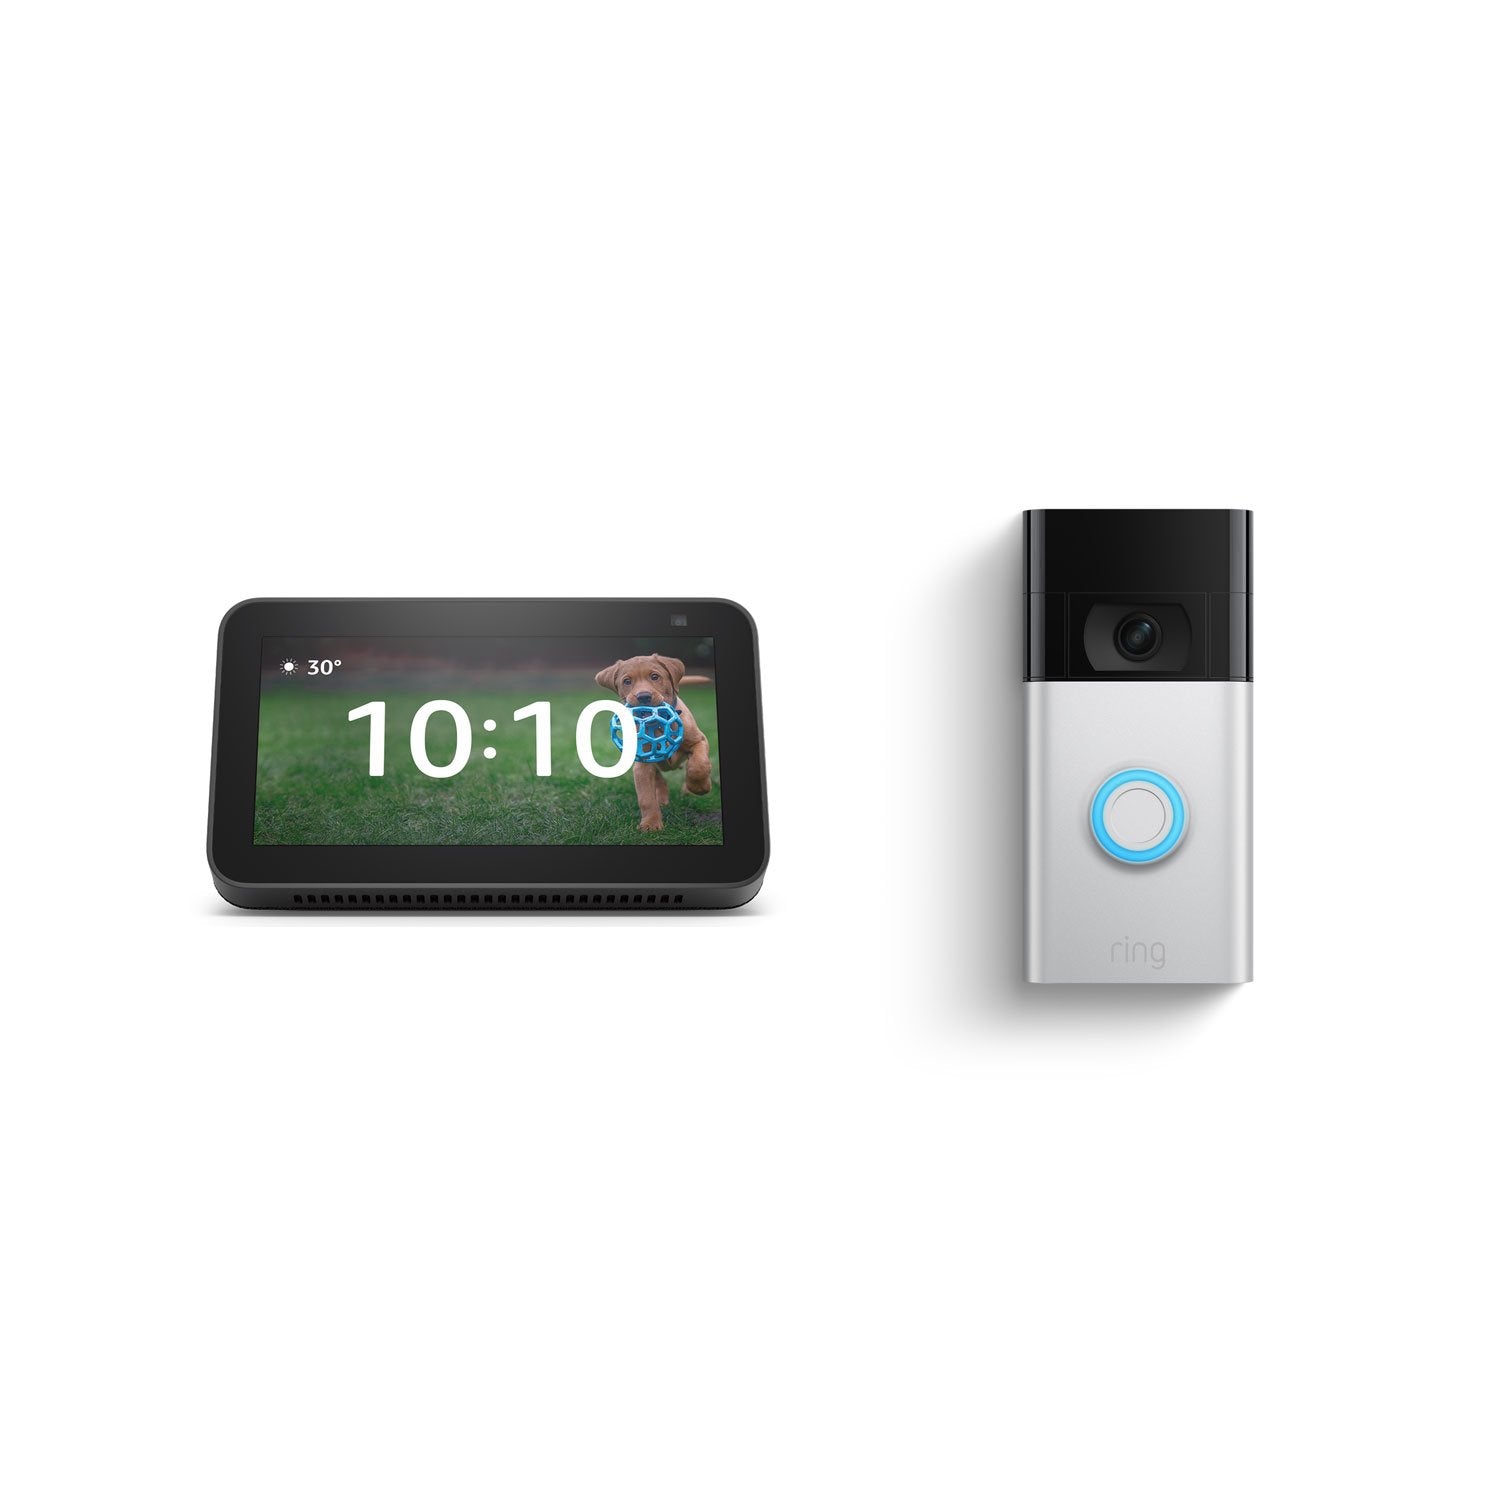 Video Doorbell with Echo Show 5 (for 2nd Generation) - Satin Nickel